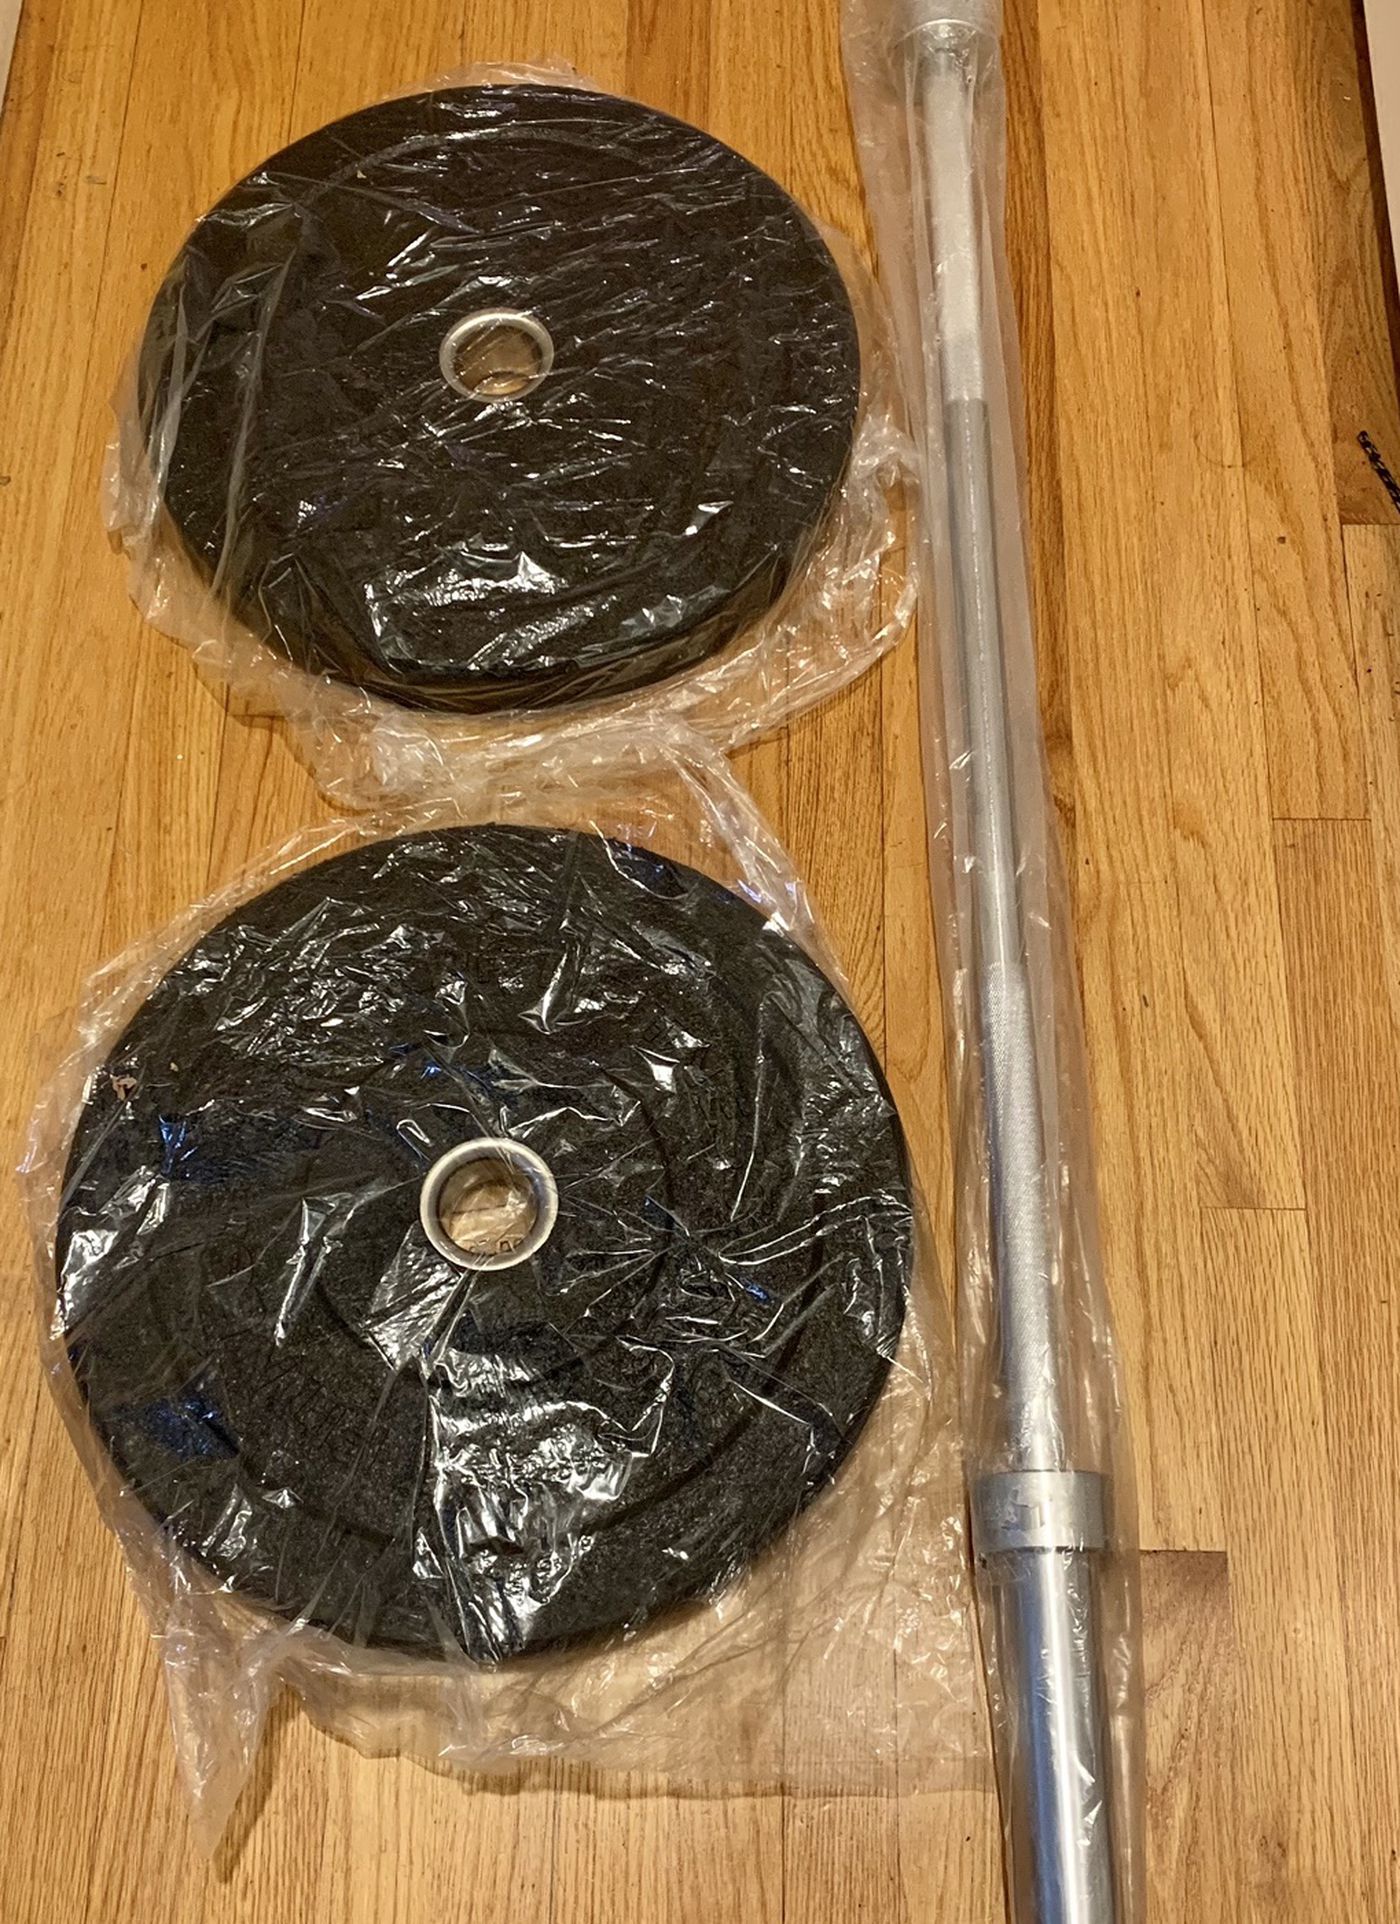 📍75 Pound Bumper Weight Set 📍📍5ft Olympic Barbell ➕2-25lb Rubber Crumb Bumper Plates 📍